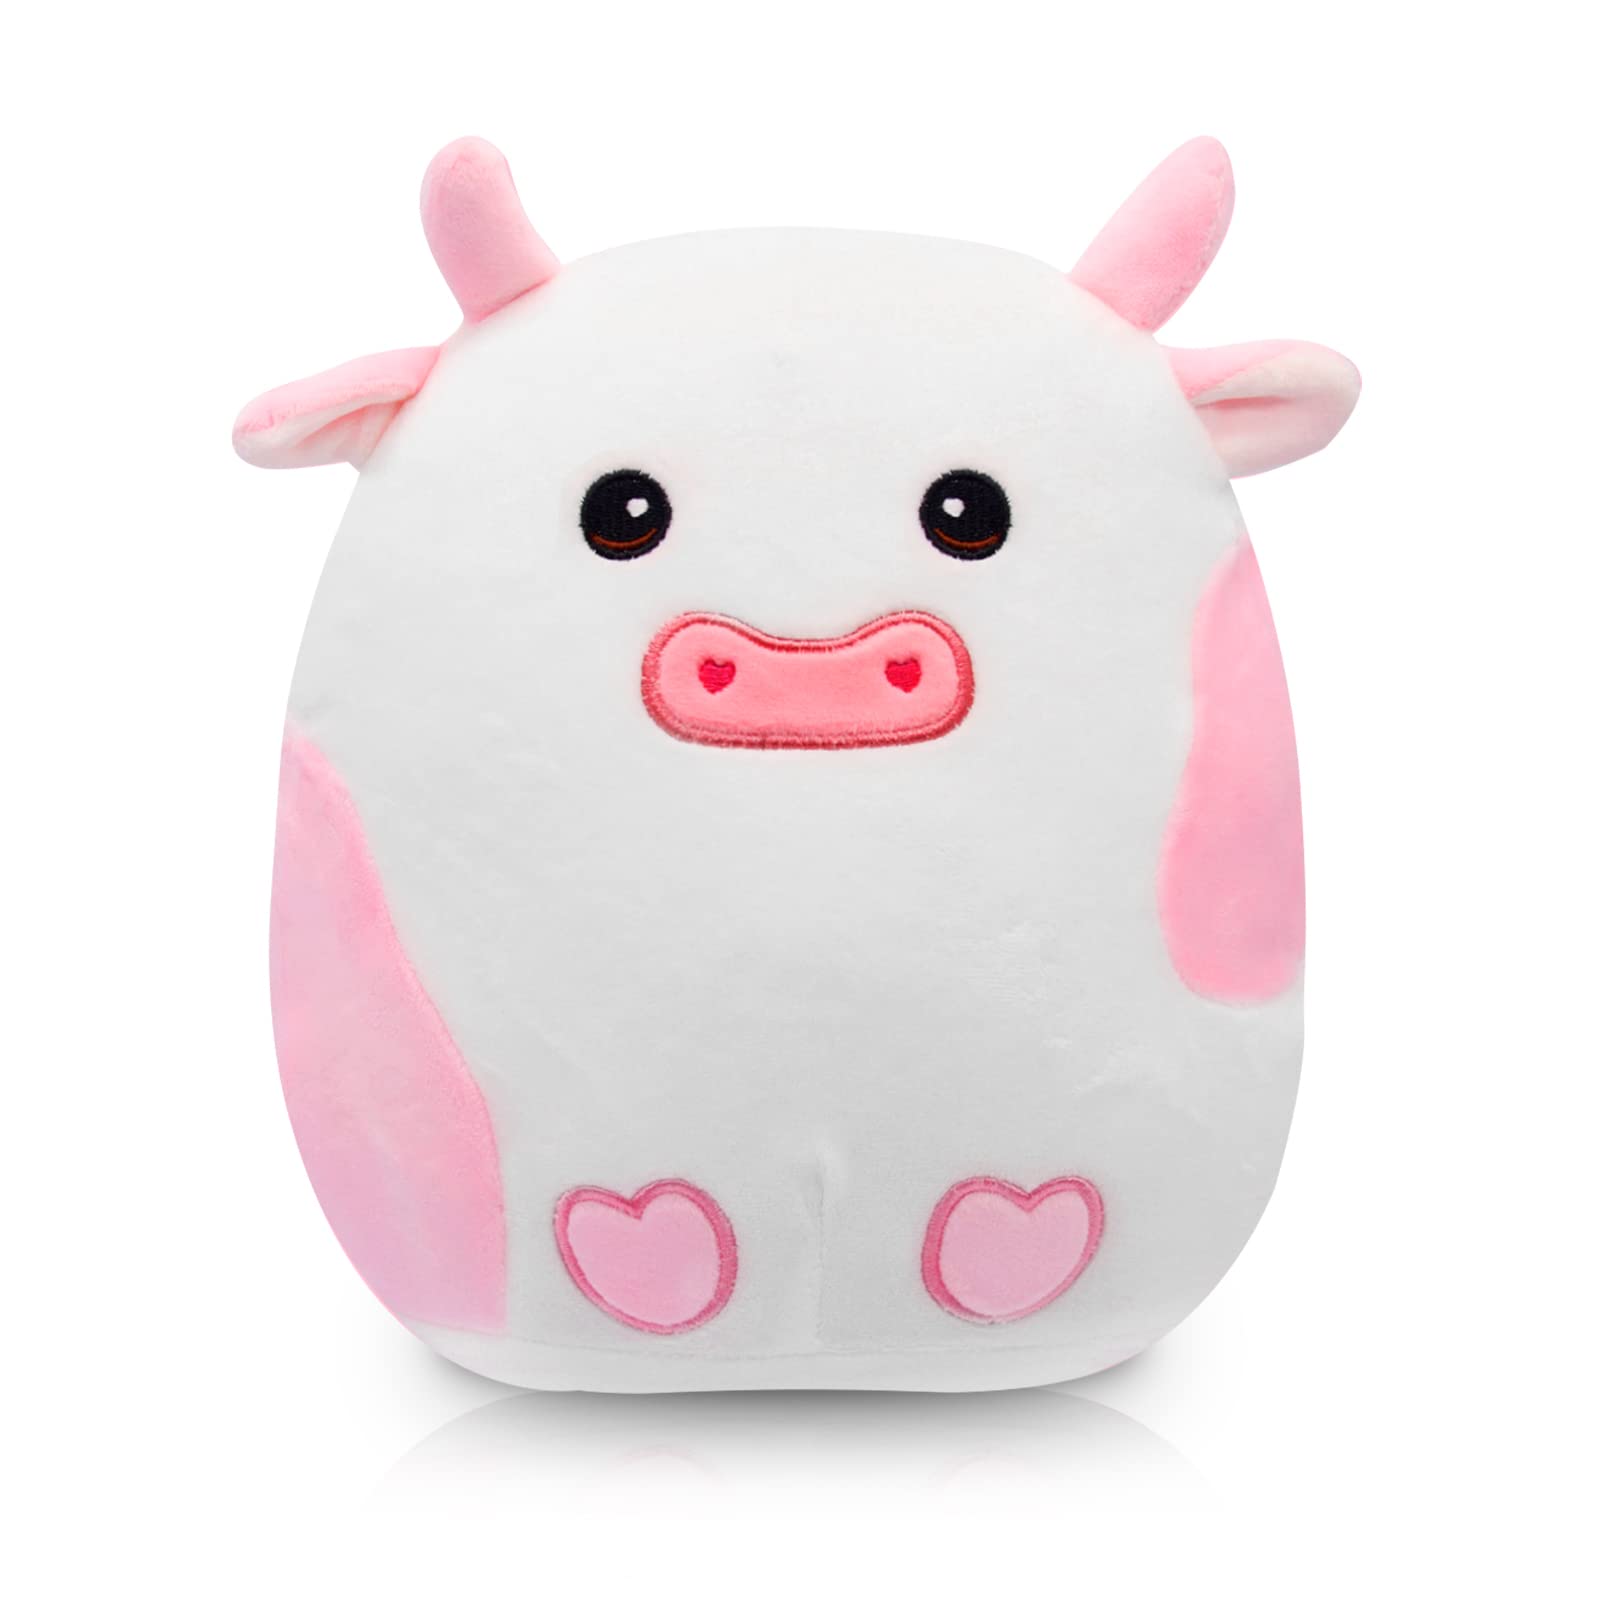 Cow Pillow Plush - 3D Cute Cow Plushie Toy - Cow Stuffed Animals Pillow - 10 Inch Soft Plush Cows Toy for Home Car Decoration - Gift for Kids Girlfriends Lover